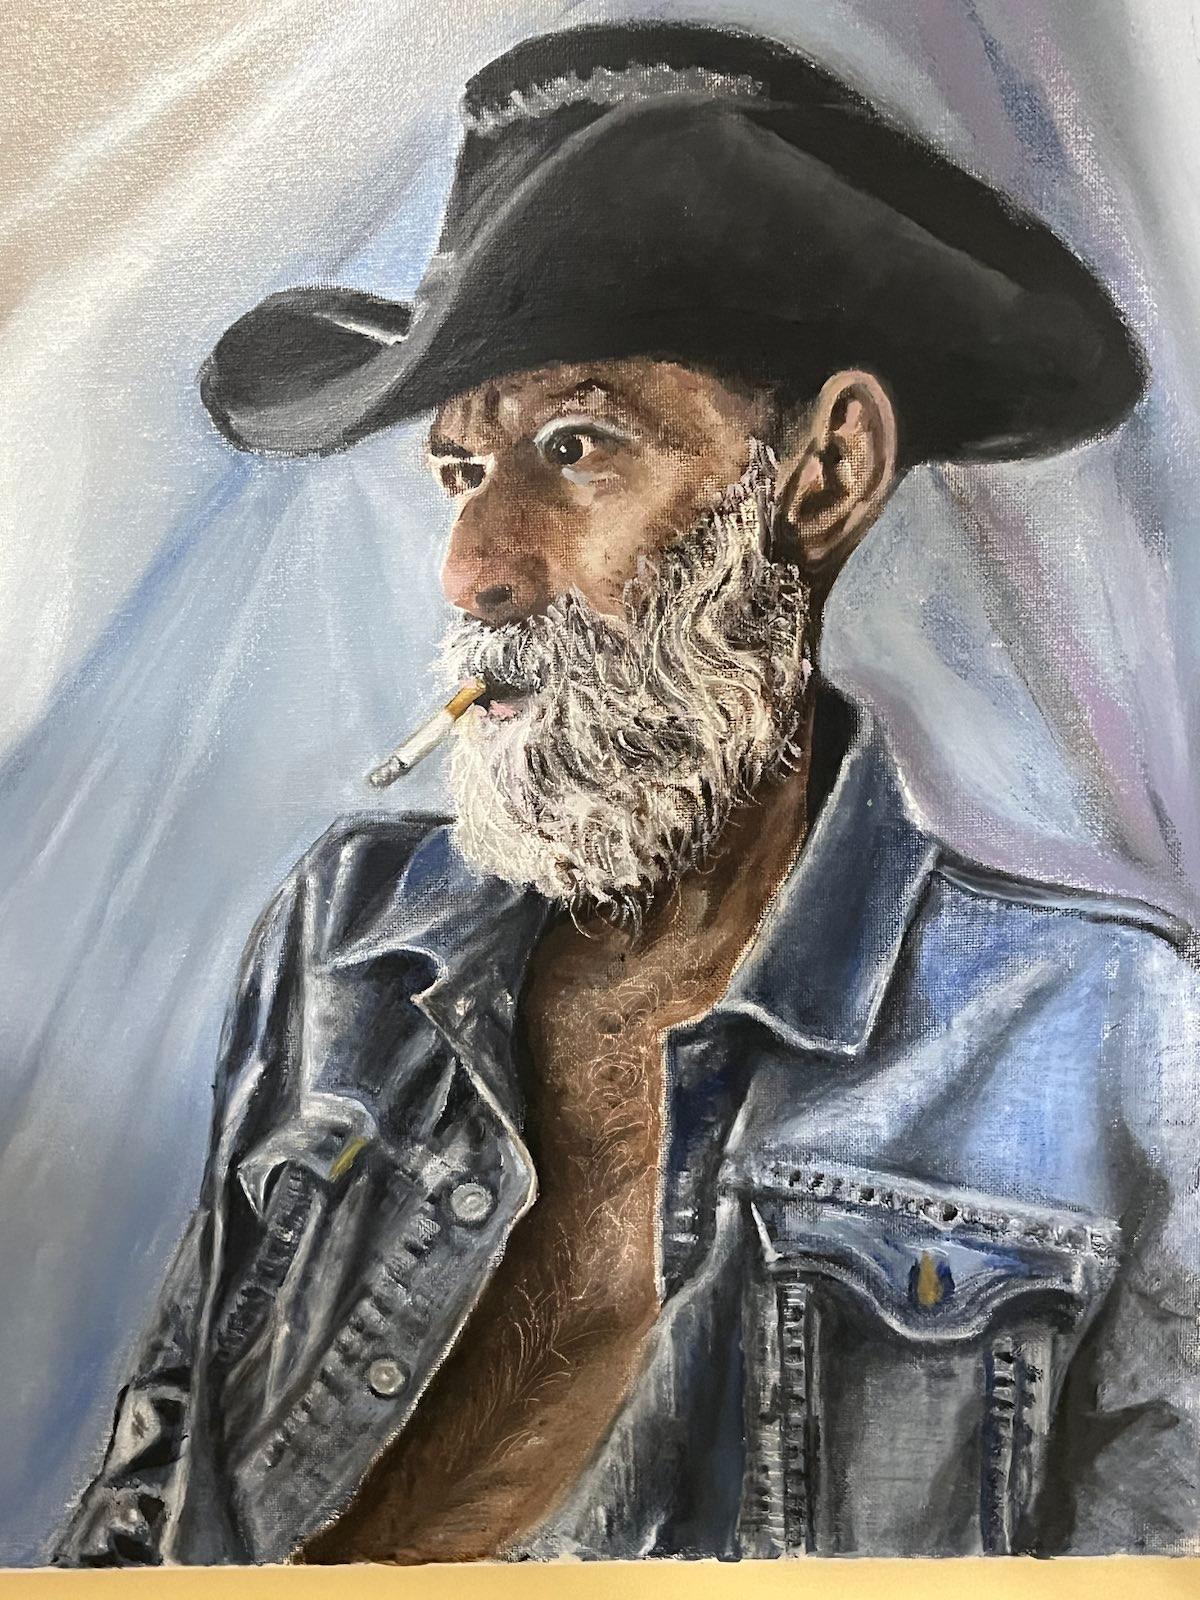 First Completed Portrait in Kevin's "Men of the Mountain" Series.